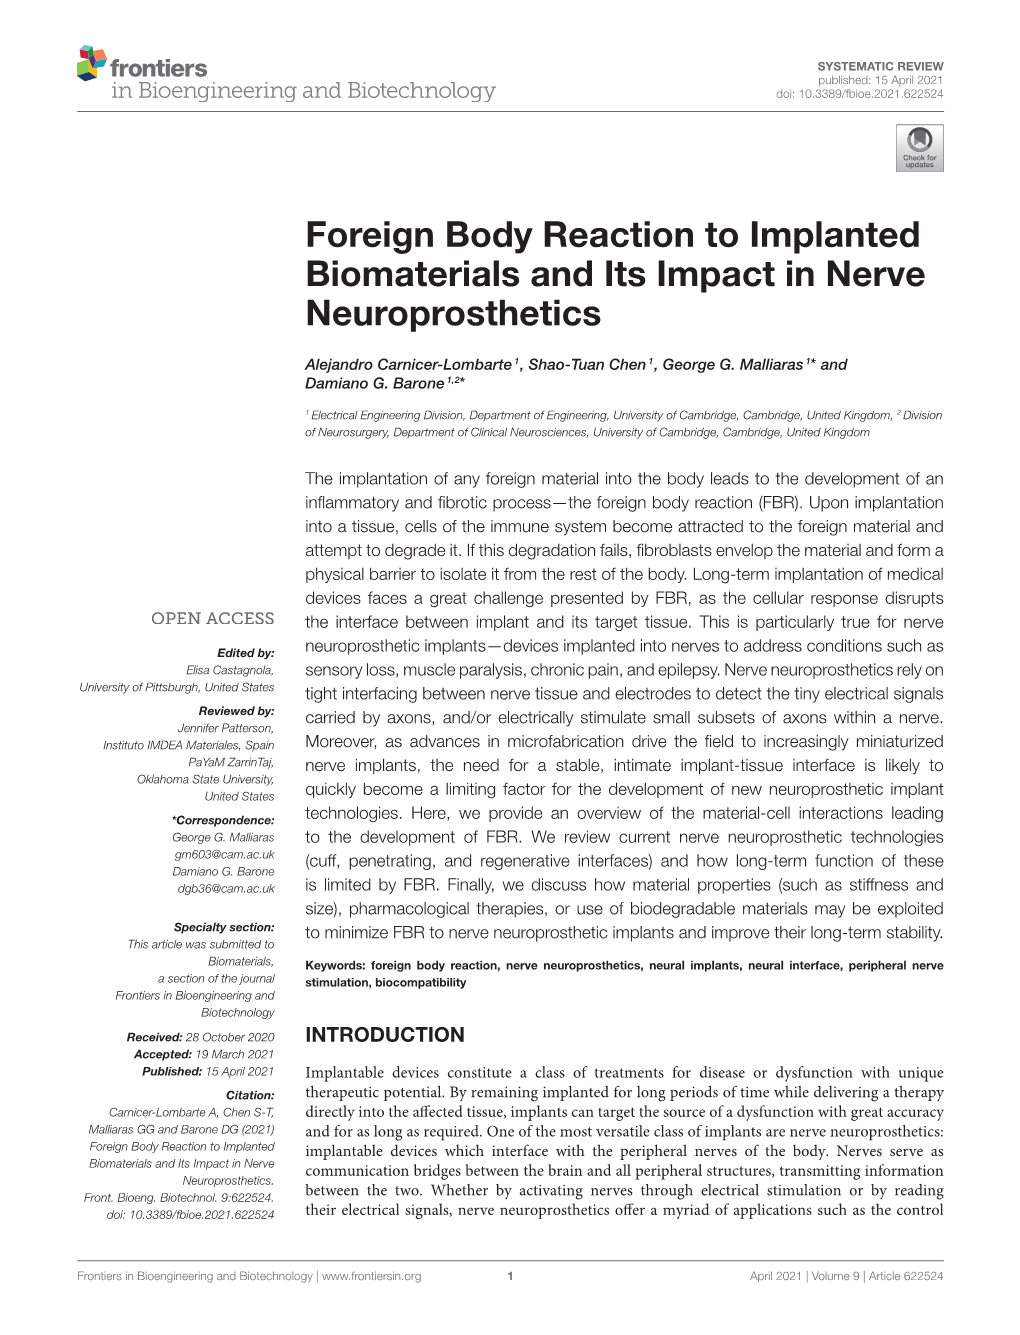 Foreign Body Reaction to Implanted Biomaterials and Its Impact in Nerve Neuroprosthetics